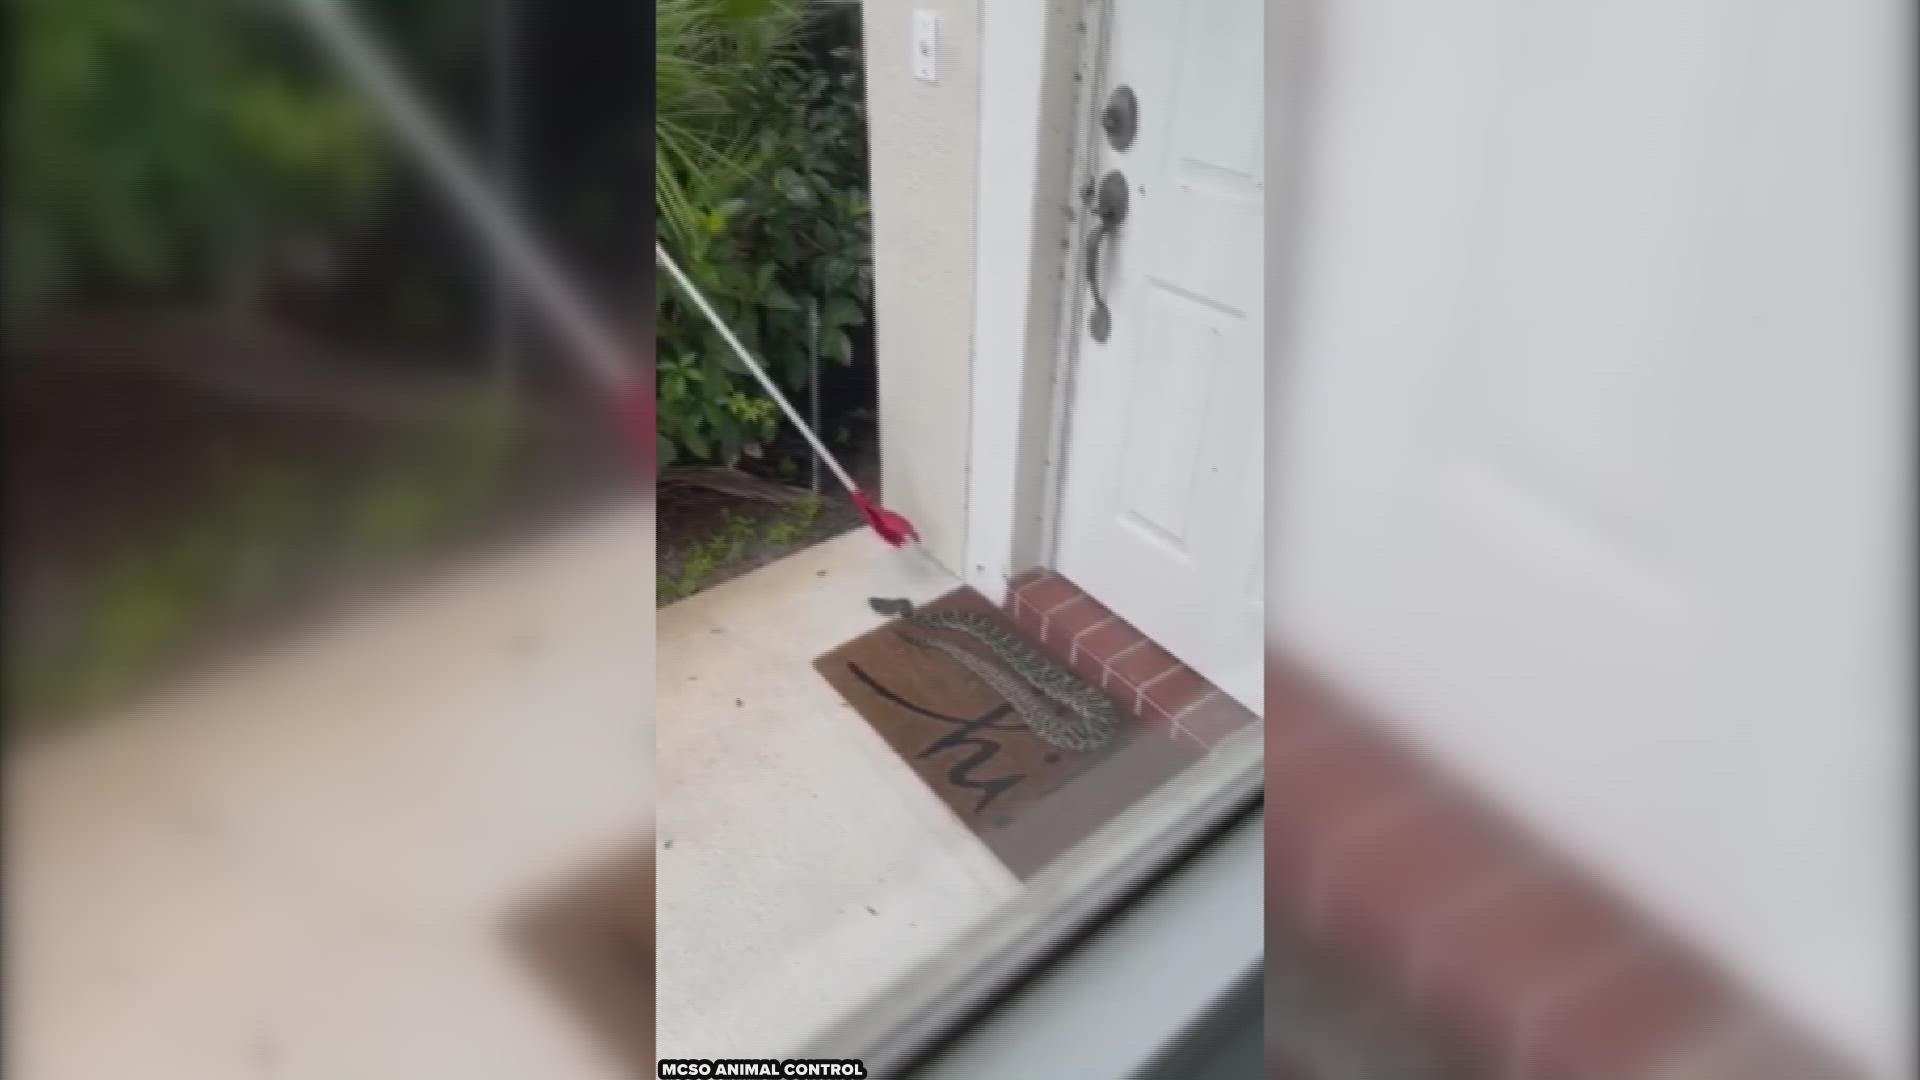 Video recorded shows two animal control workers using snake tongs to pick up the scaly visitor and try to place it in a bucket.